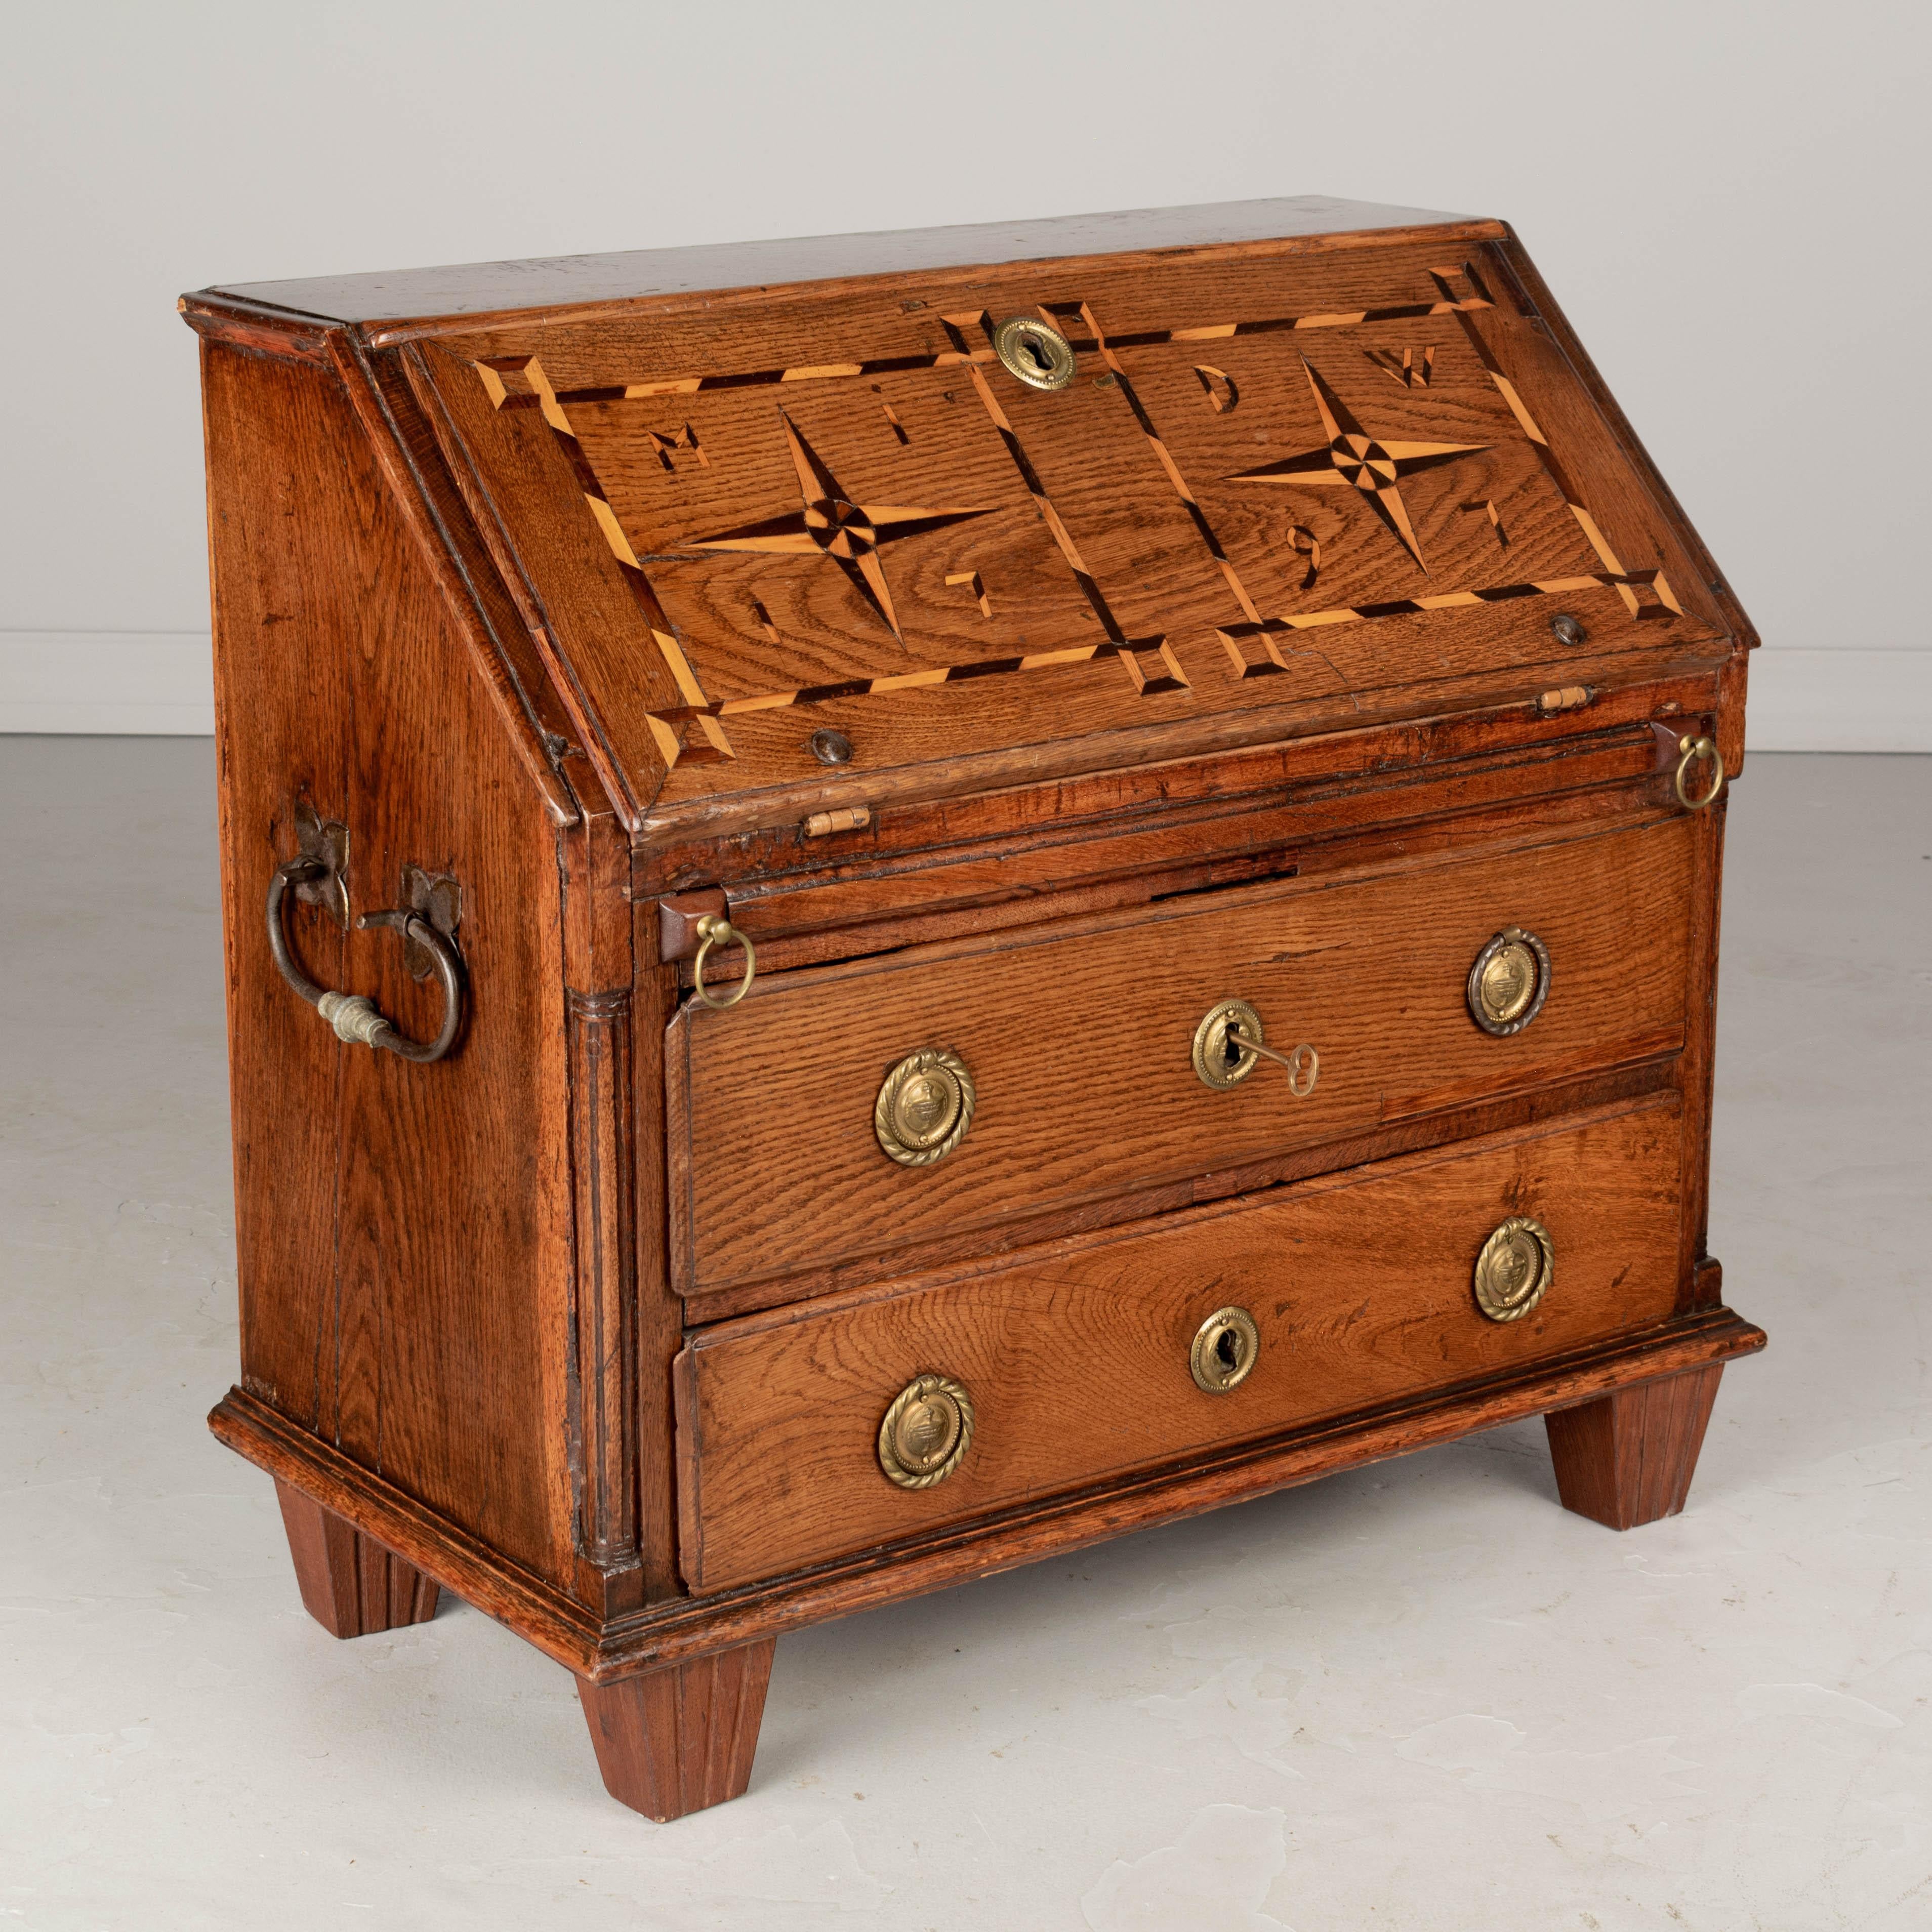 A late 18th century Country French child's Size drop front desk from Alsace. Made of solid oak with marquetry front dated 1797. Interior with seven small drawers and painted writing surface. Two dovetailed drawers with brass hardware. Large wrought